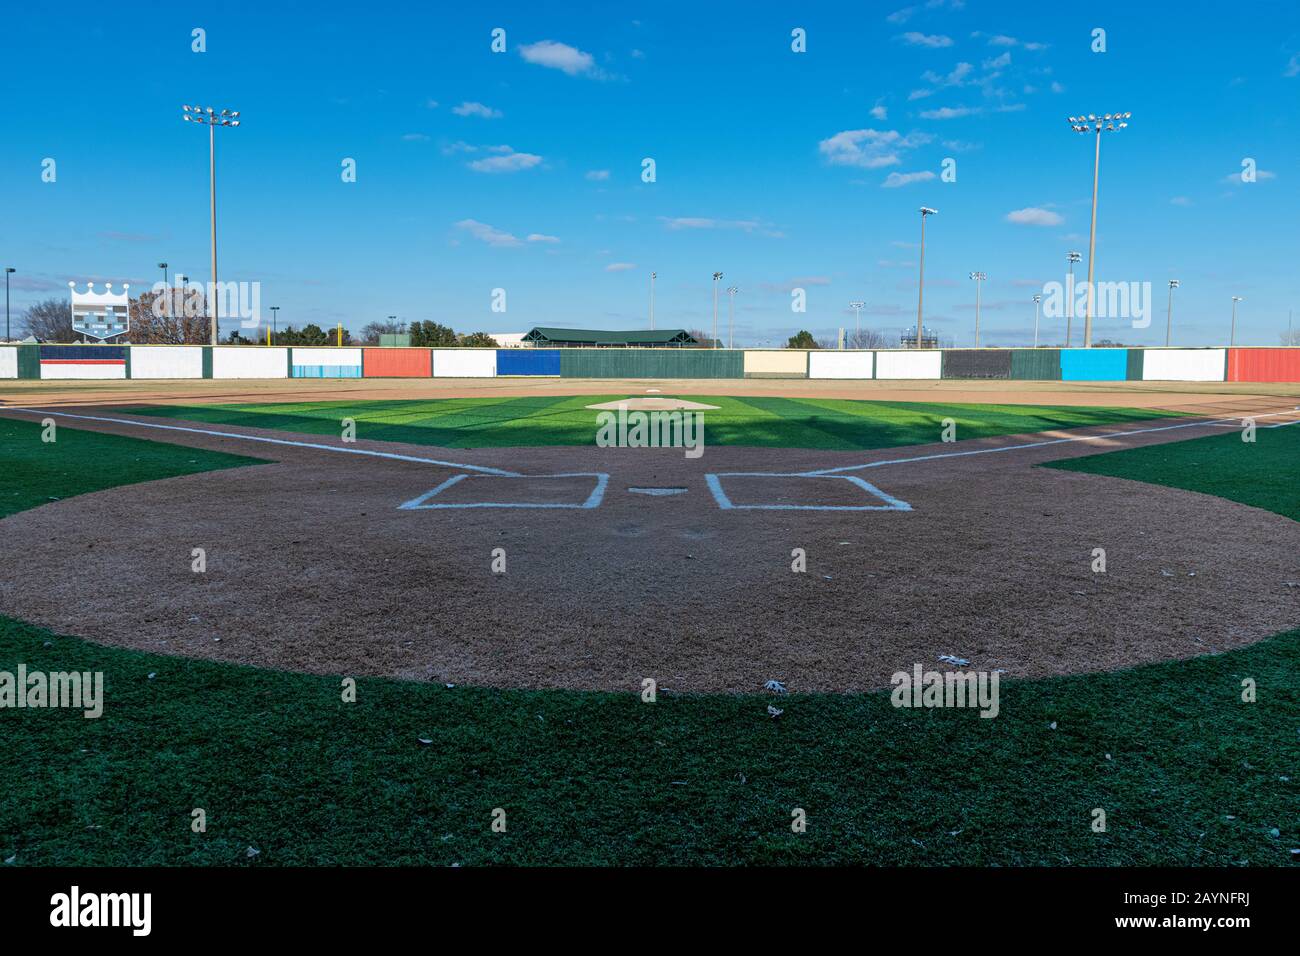 View of a baseball field with artificail turf as seen from behind home plate and looking out across the pitcher's mound to the outfield. Stock Photo